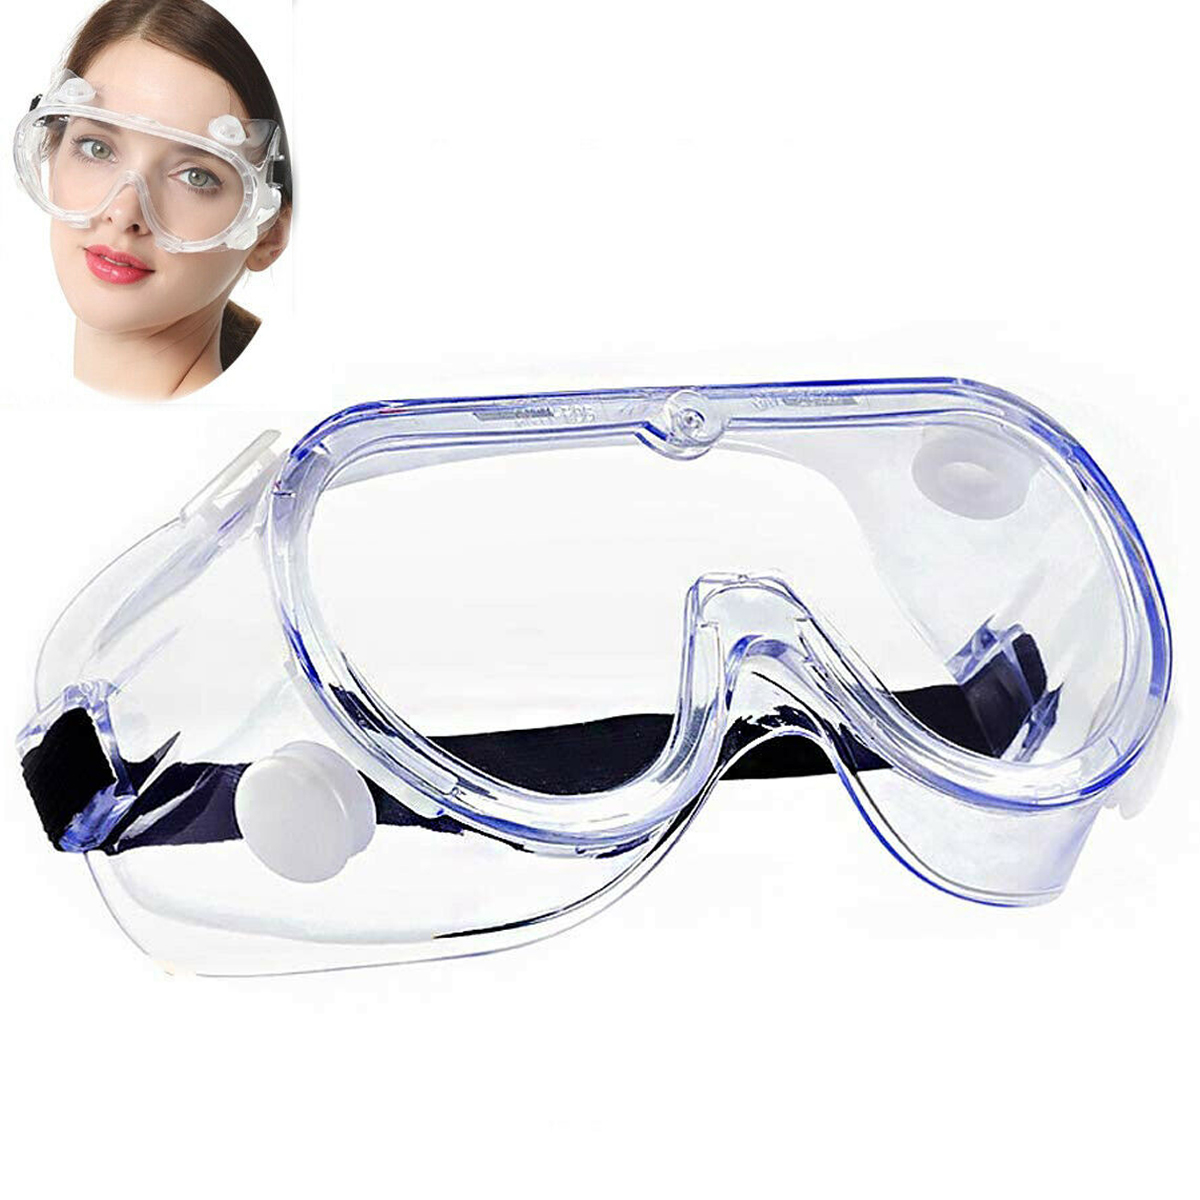 Us Safety Goggles Over Glasses Lab Work Eye Protective Eyewear Clear Lens 1pcs Ebay